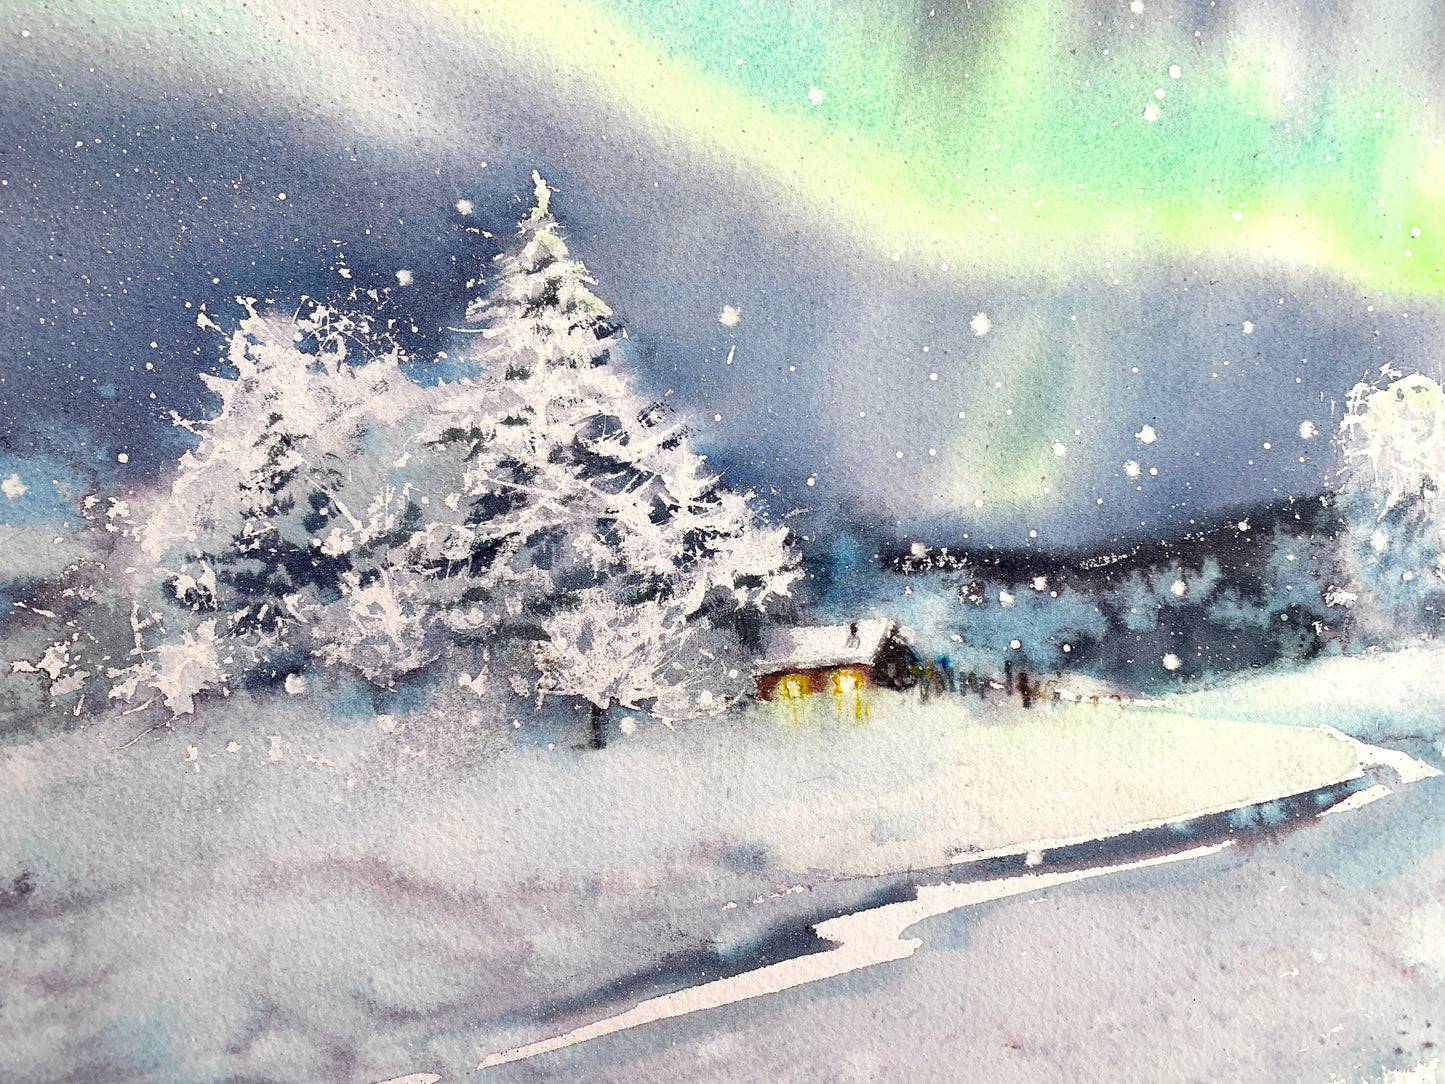 Aurora Borealis Painting Watercolor Original, Winter Forest, Northern lights, Snowy Landscape, Nordic Wall Art, Christmas Gift, Polar lights